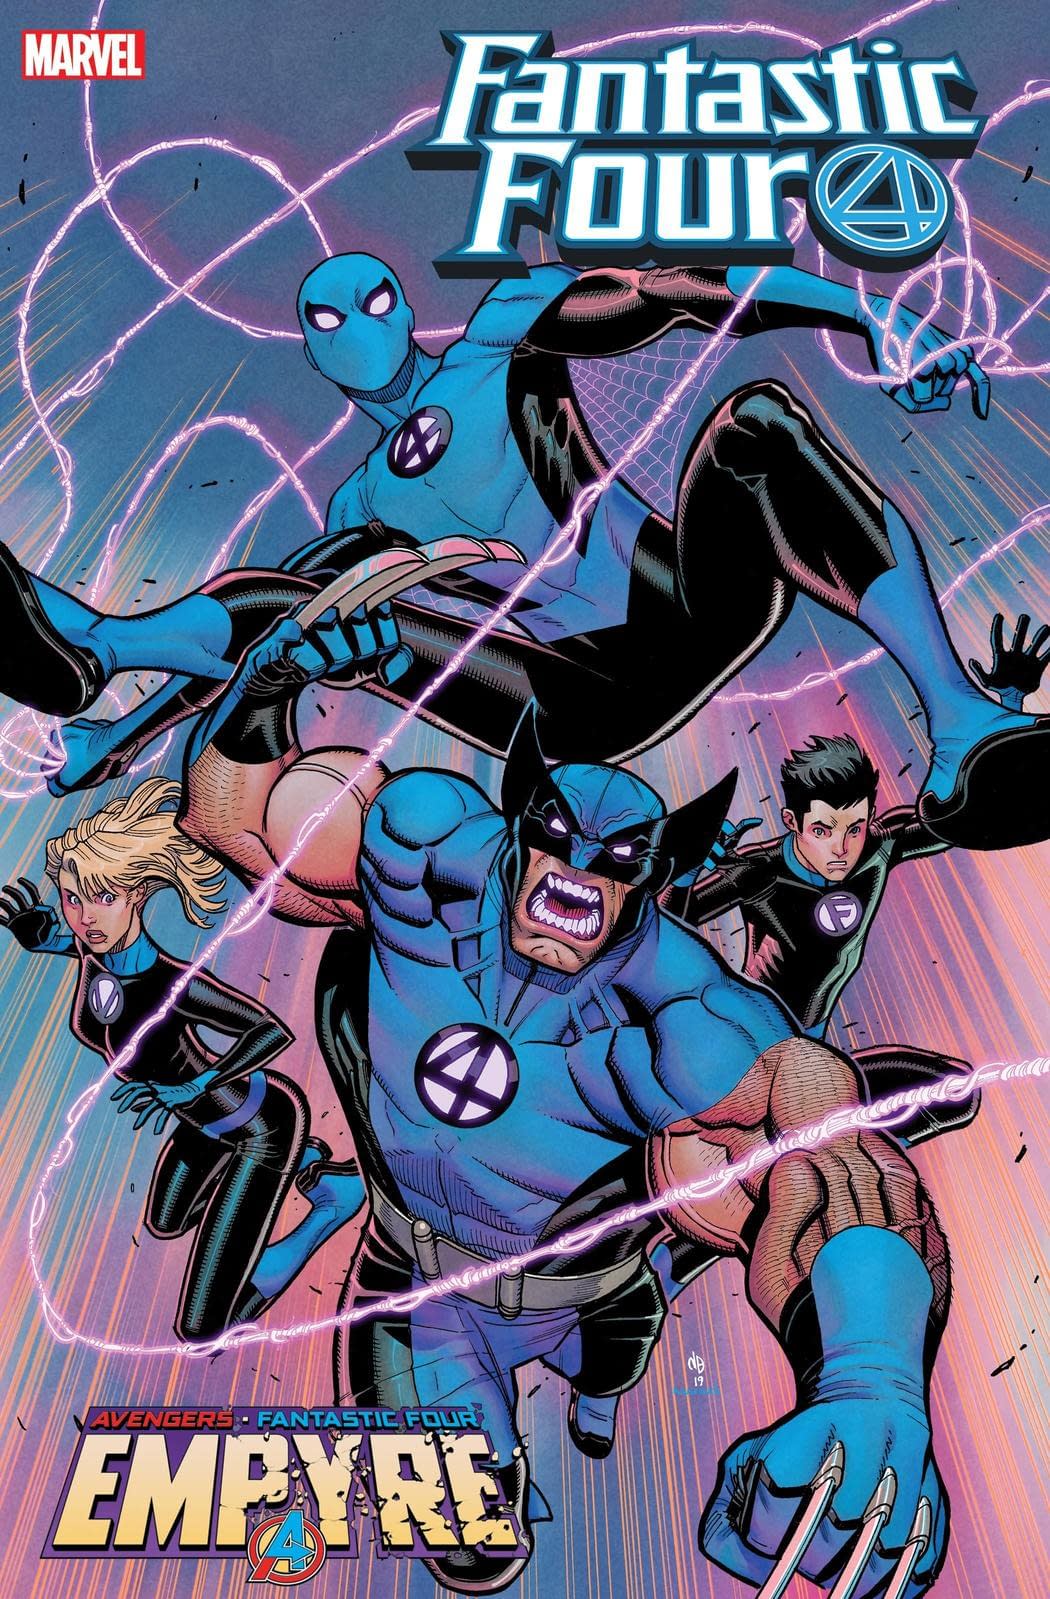 A4: Empyre with a Y Covers Reveal X-Men Tie-in, Wolverine and Spidey Rjoin Fantastic Four